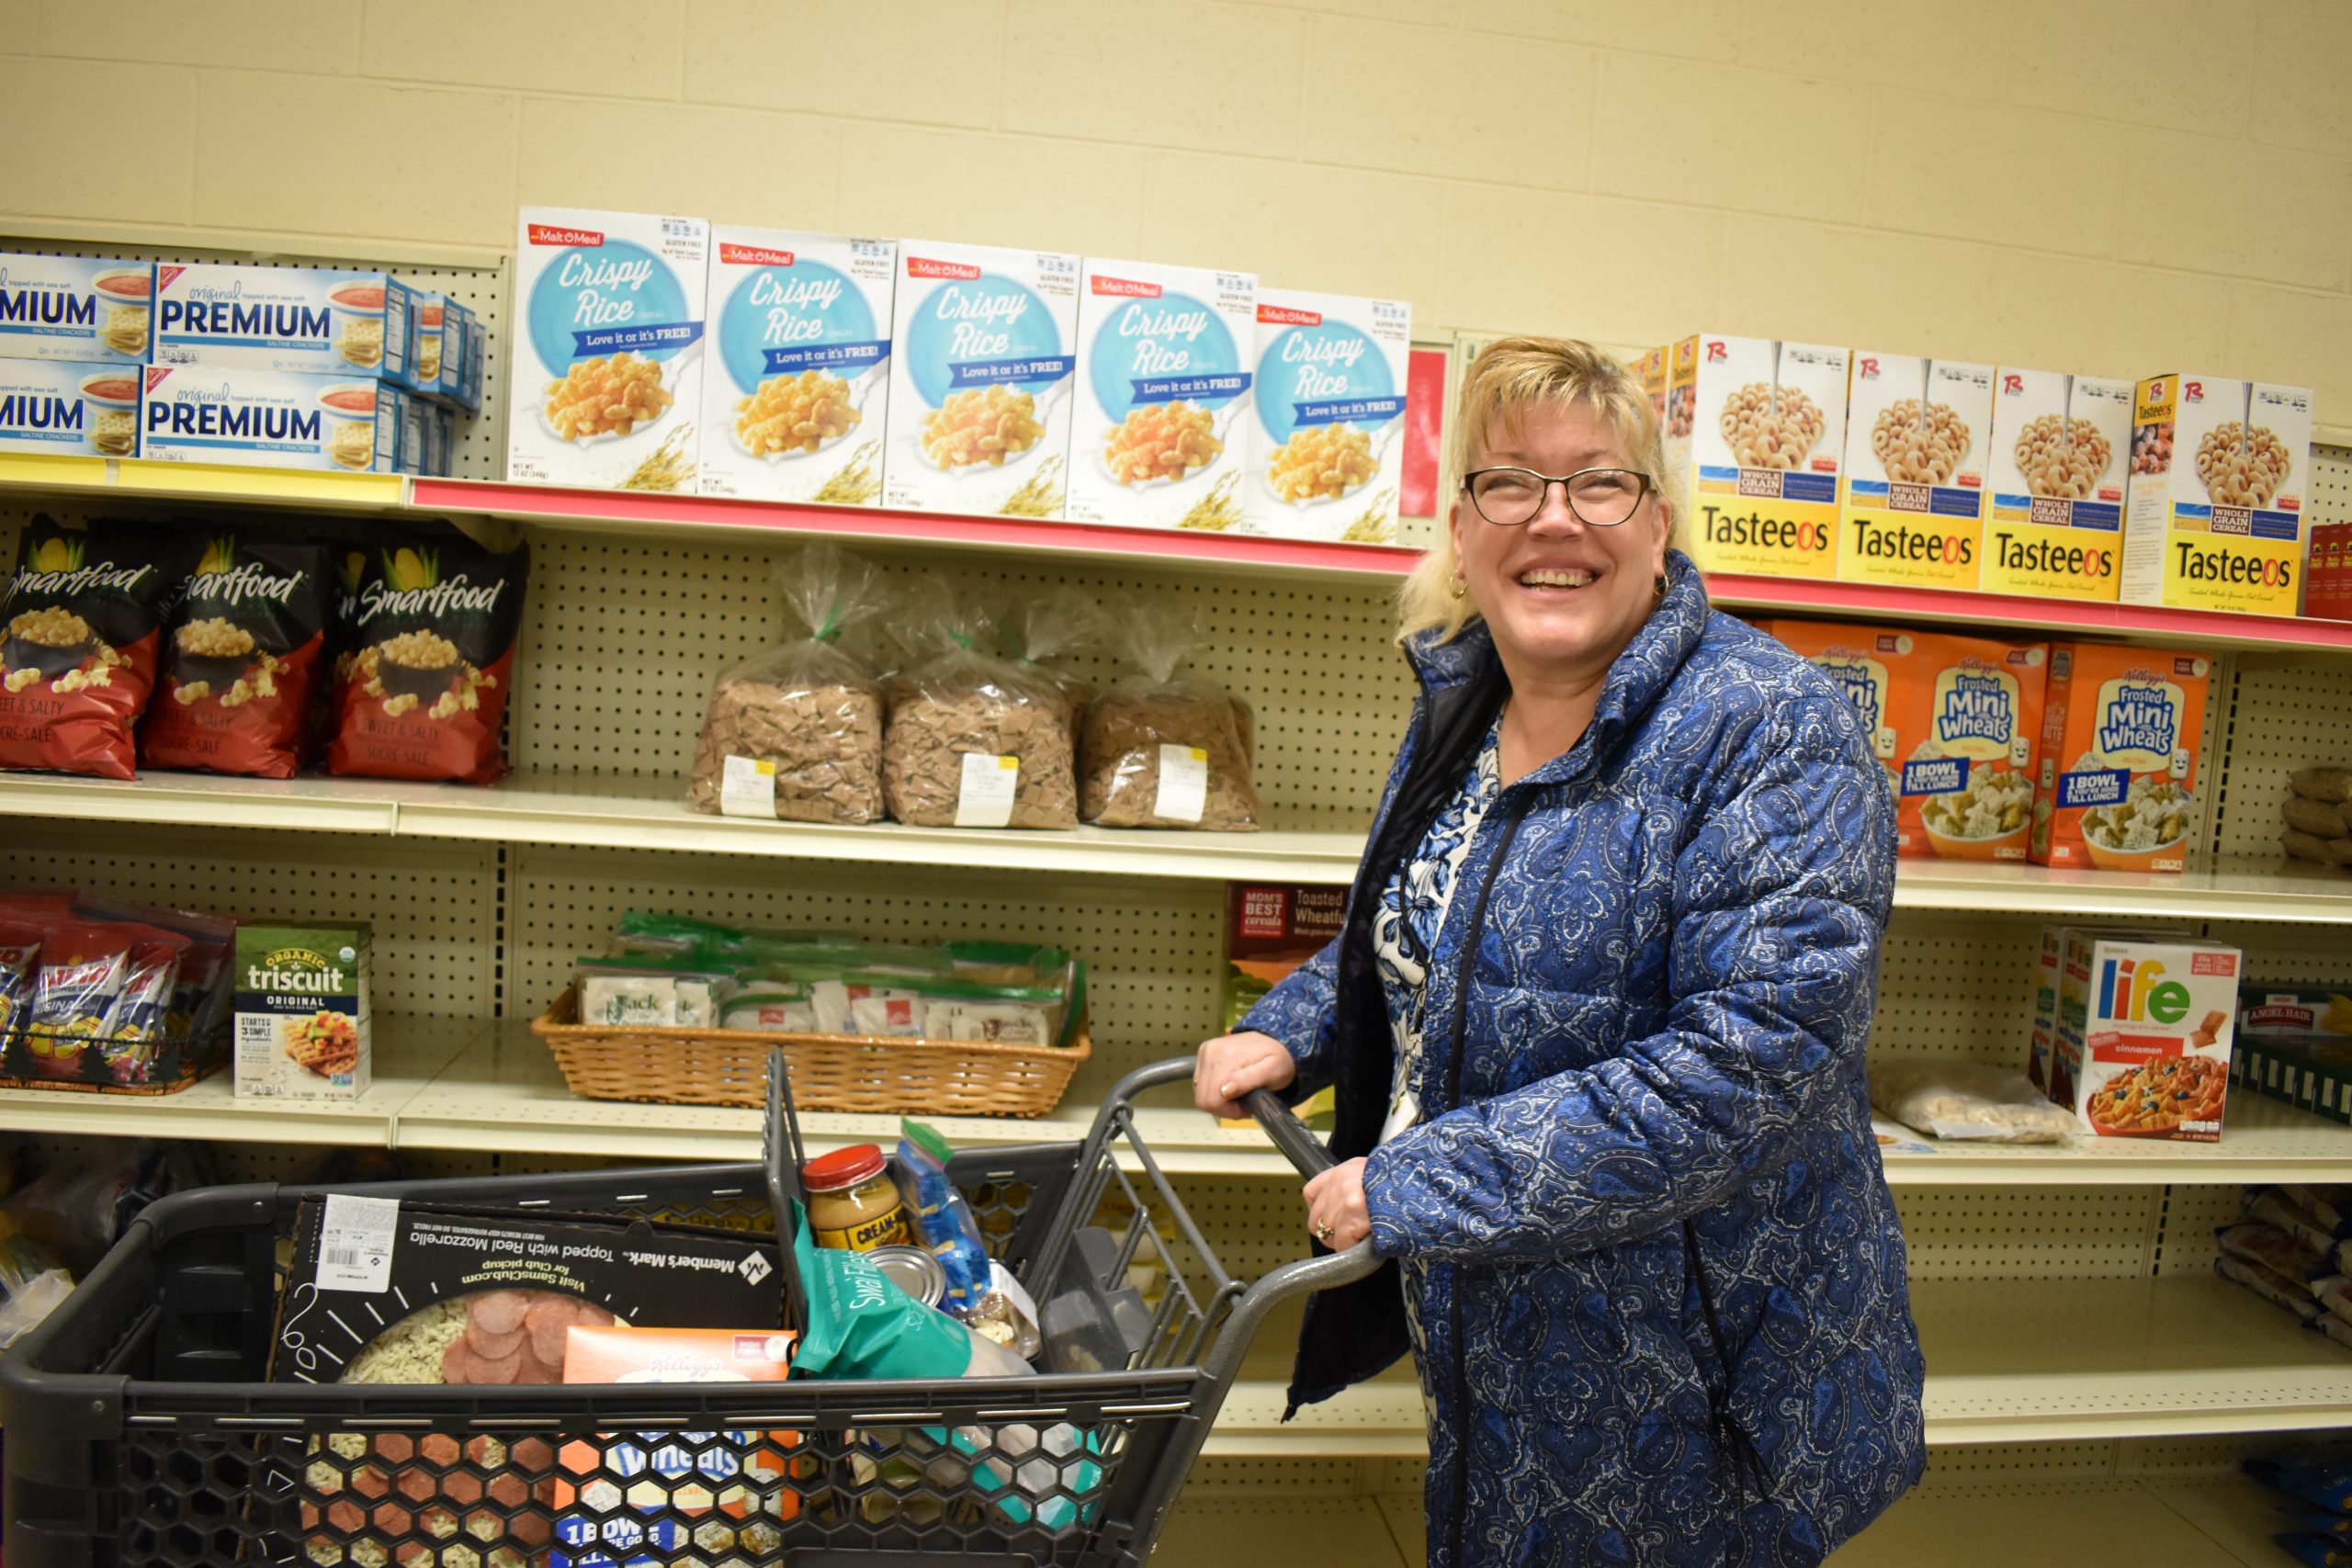 Deb shops for food at the pantry